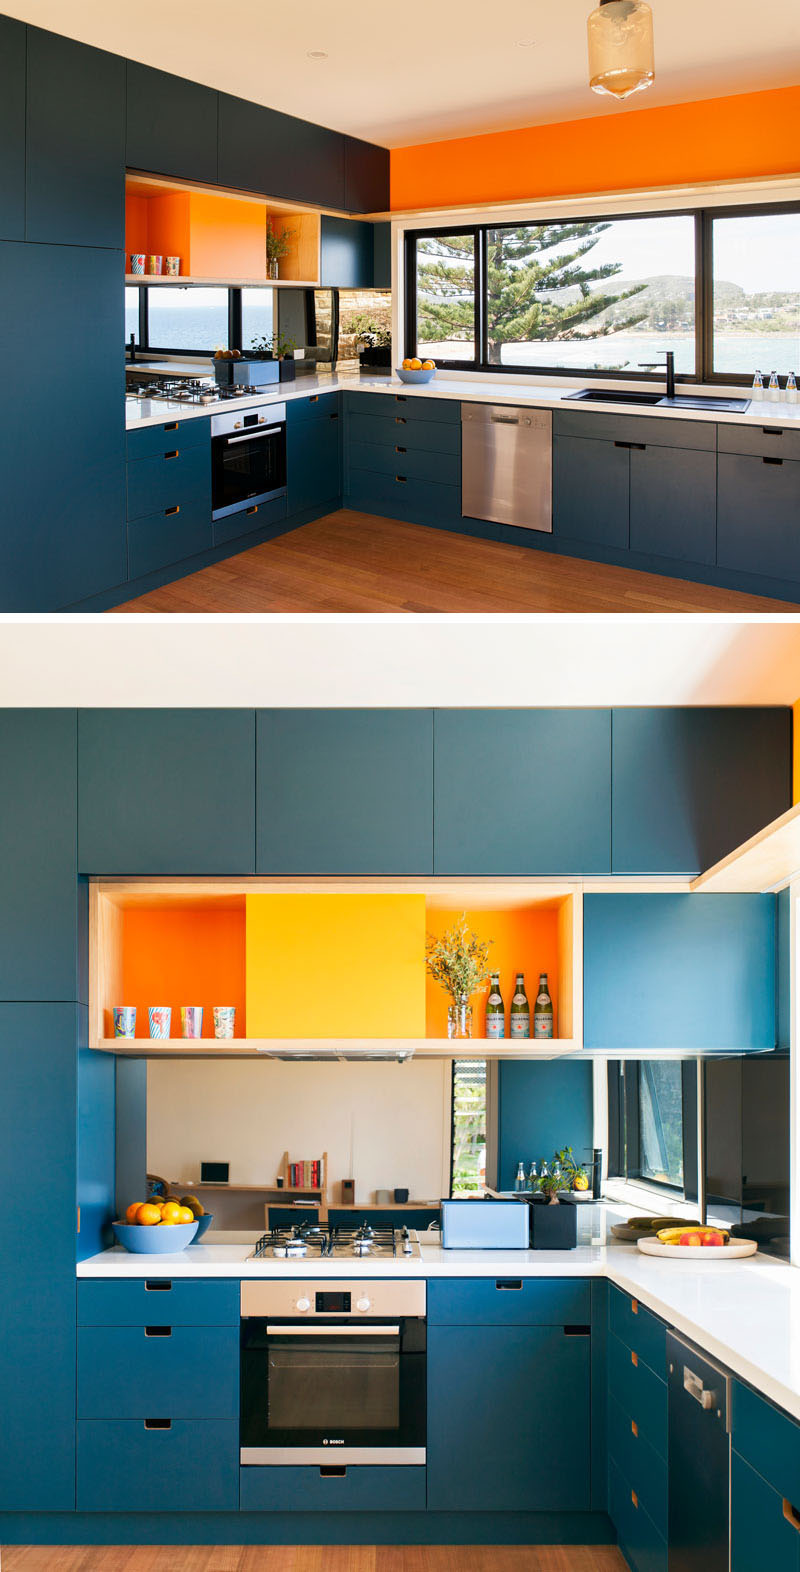 Kitchen Color Inspiration - 12 Shades Of Blue Cabinets ...